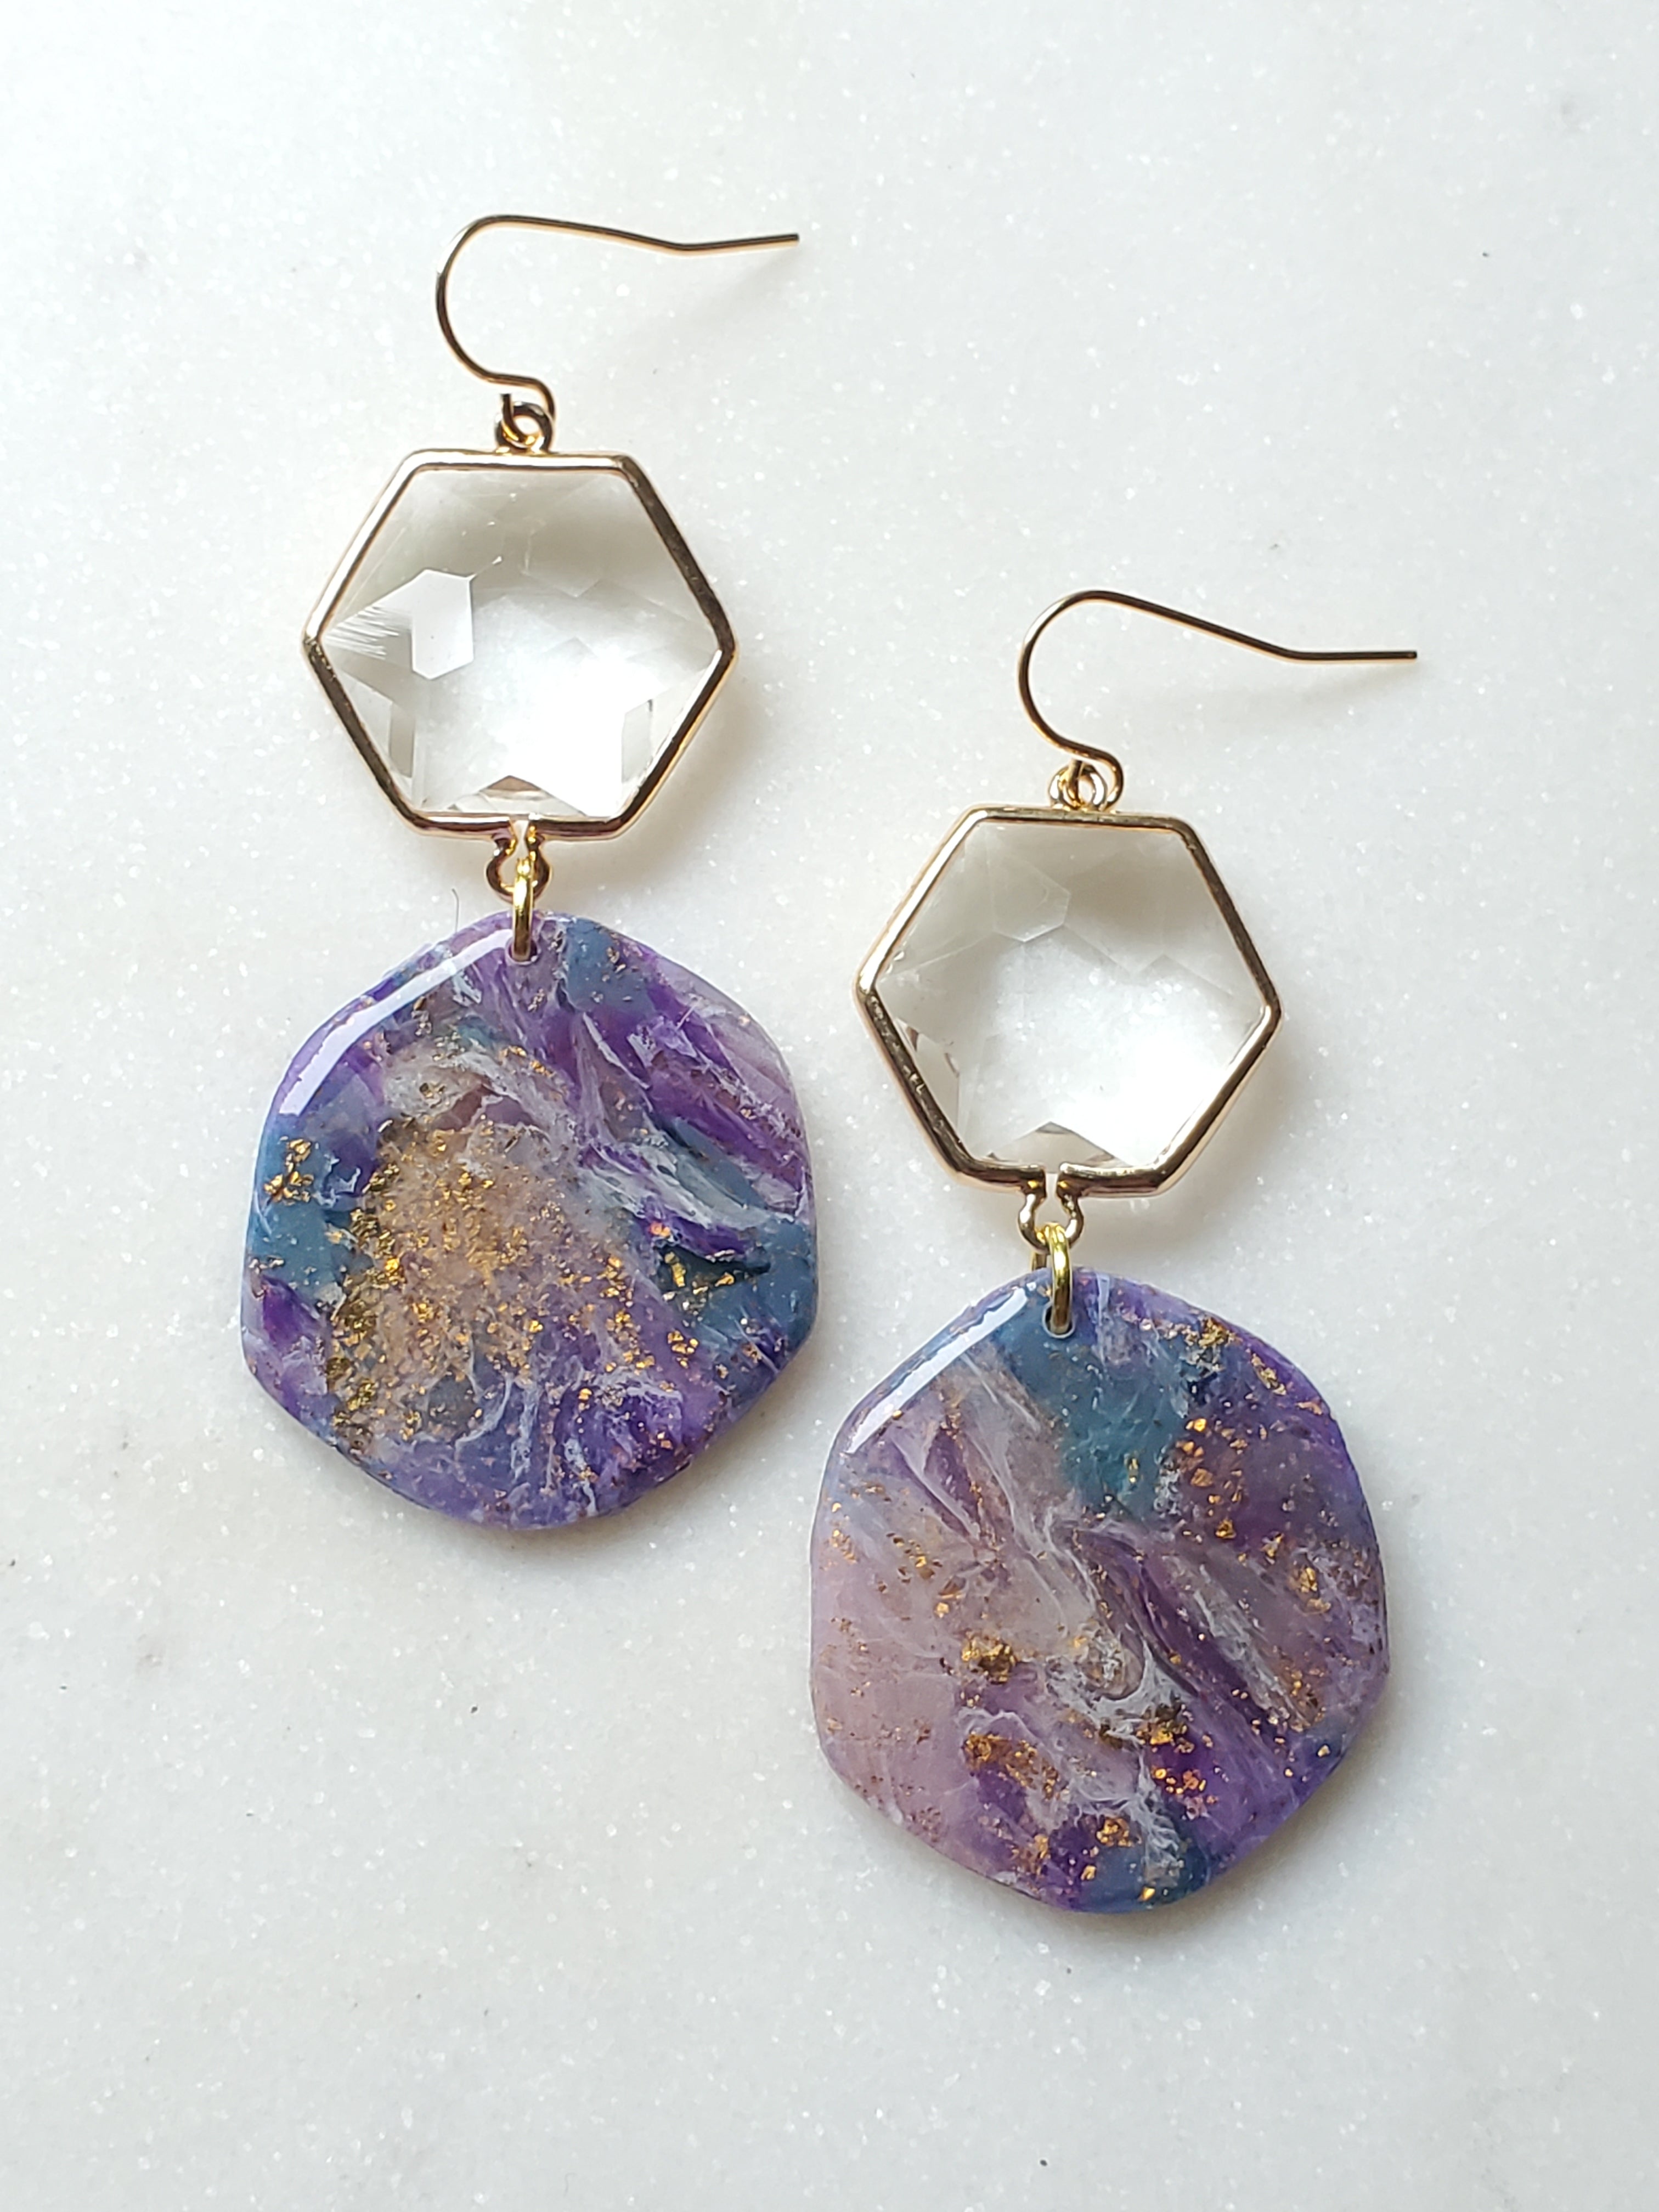 14K Gold Filled Agate Inspired Glass Statement Earrings - Purple/Blue